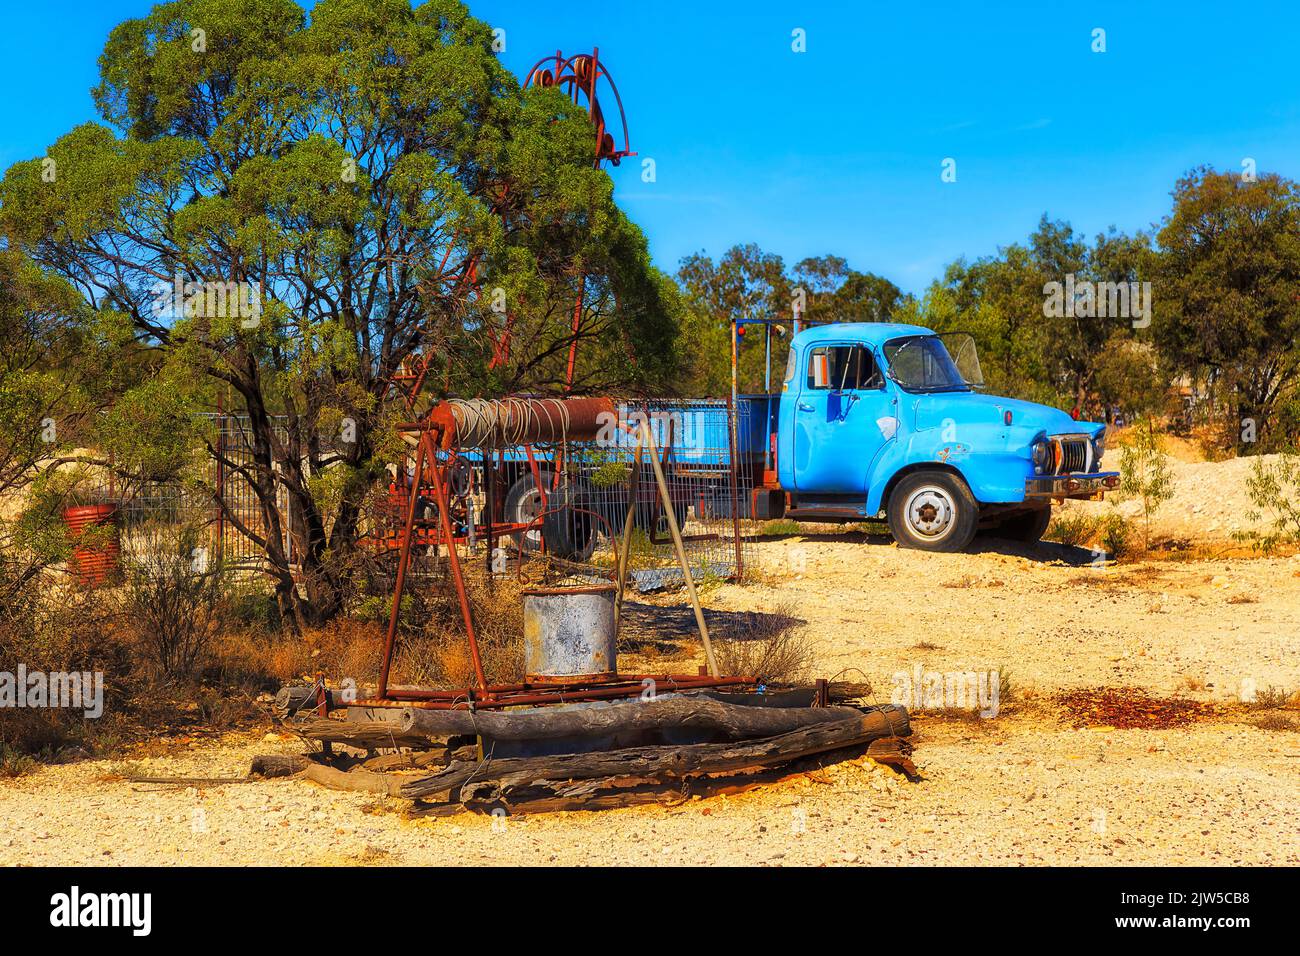 Old open mine shaft well and rust ute truck in Lightning ridge opal mining town of NSW outback, Australia. Stock Photo